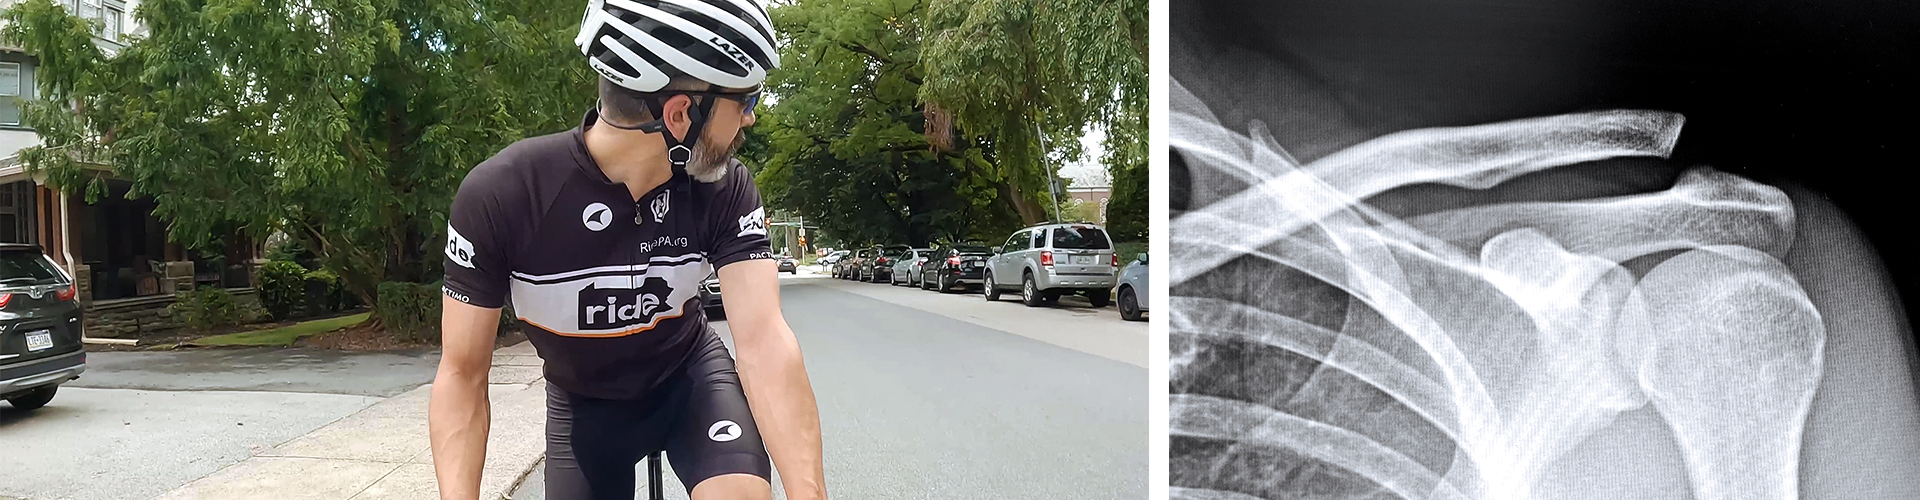 Riding with a separated shoulder. Injury timeline, recovery and training process